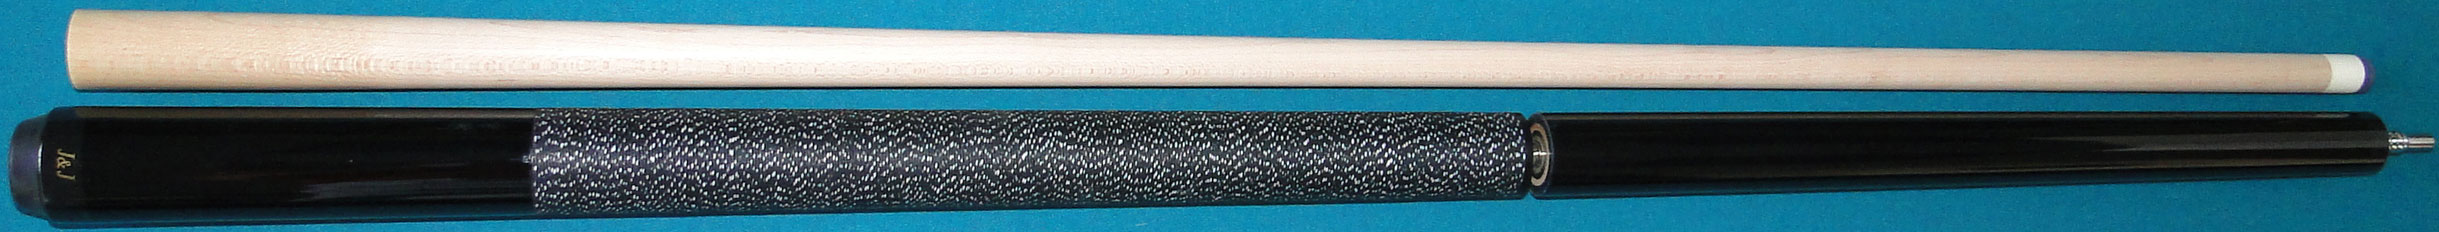 J&J Quick Release Phenolic Pool Cue Shaft Works With Various Brands 